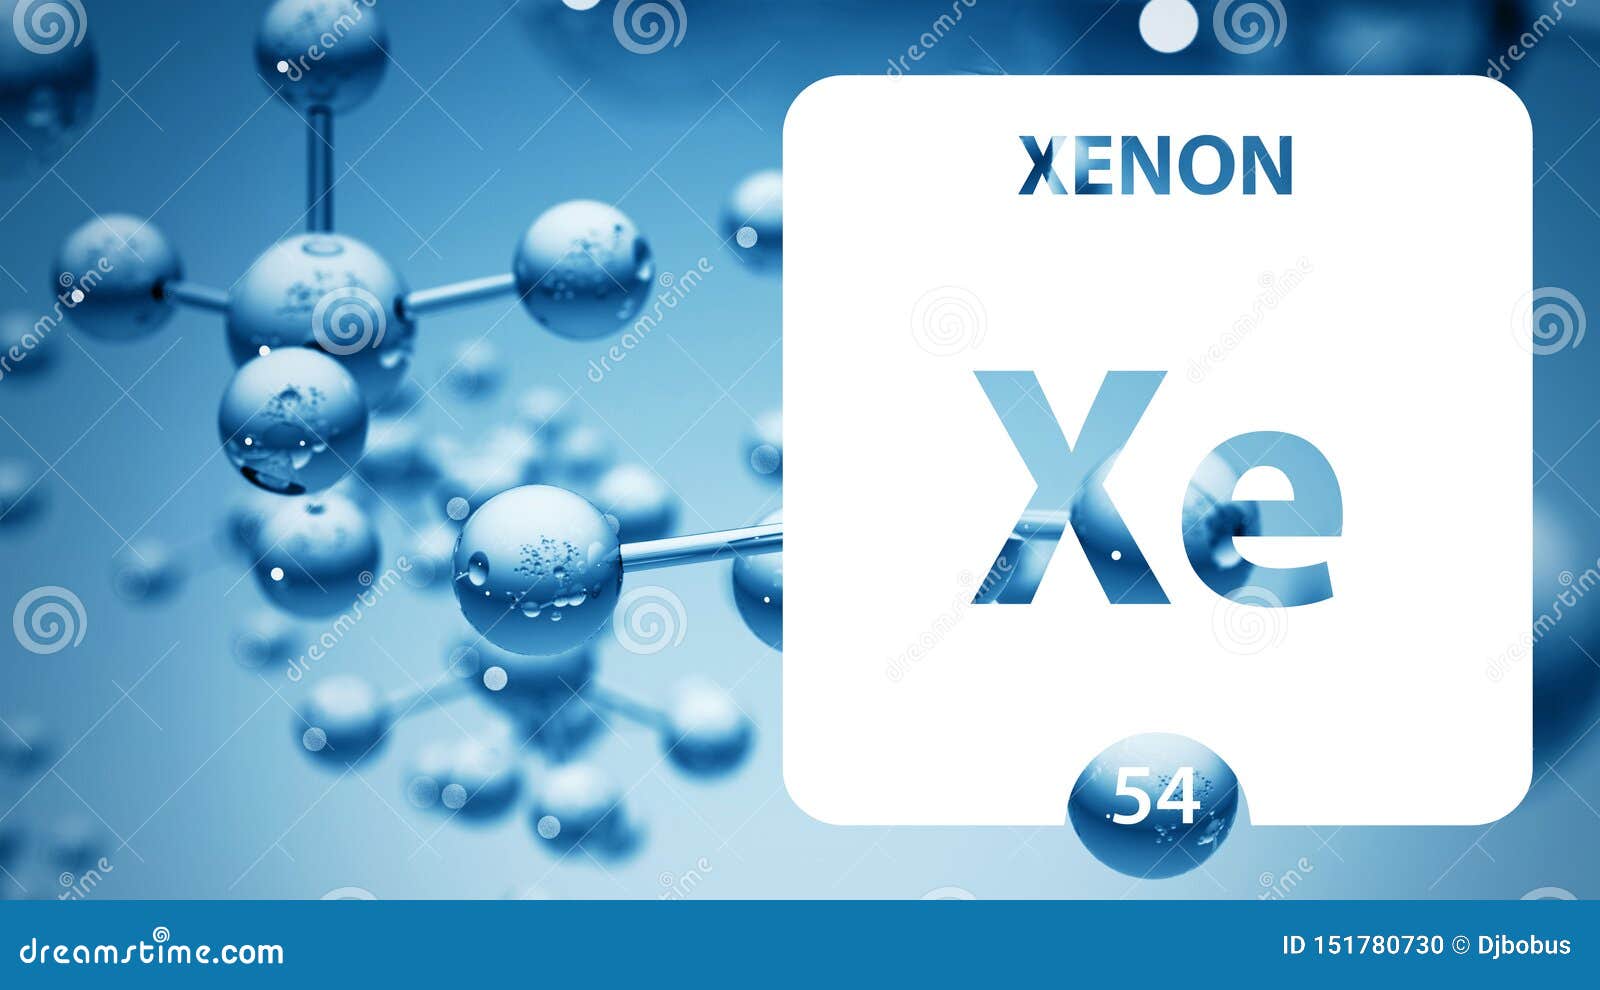 Xenon Xe Chemical Element. Xenon Sign with Atomic Number. Chemical 54 ...